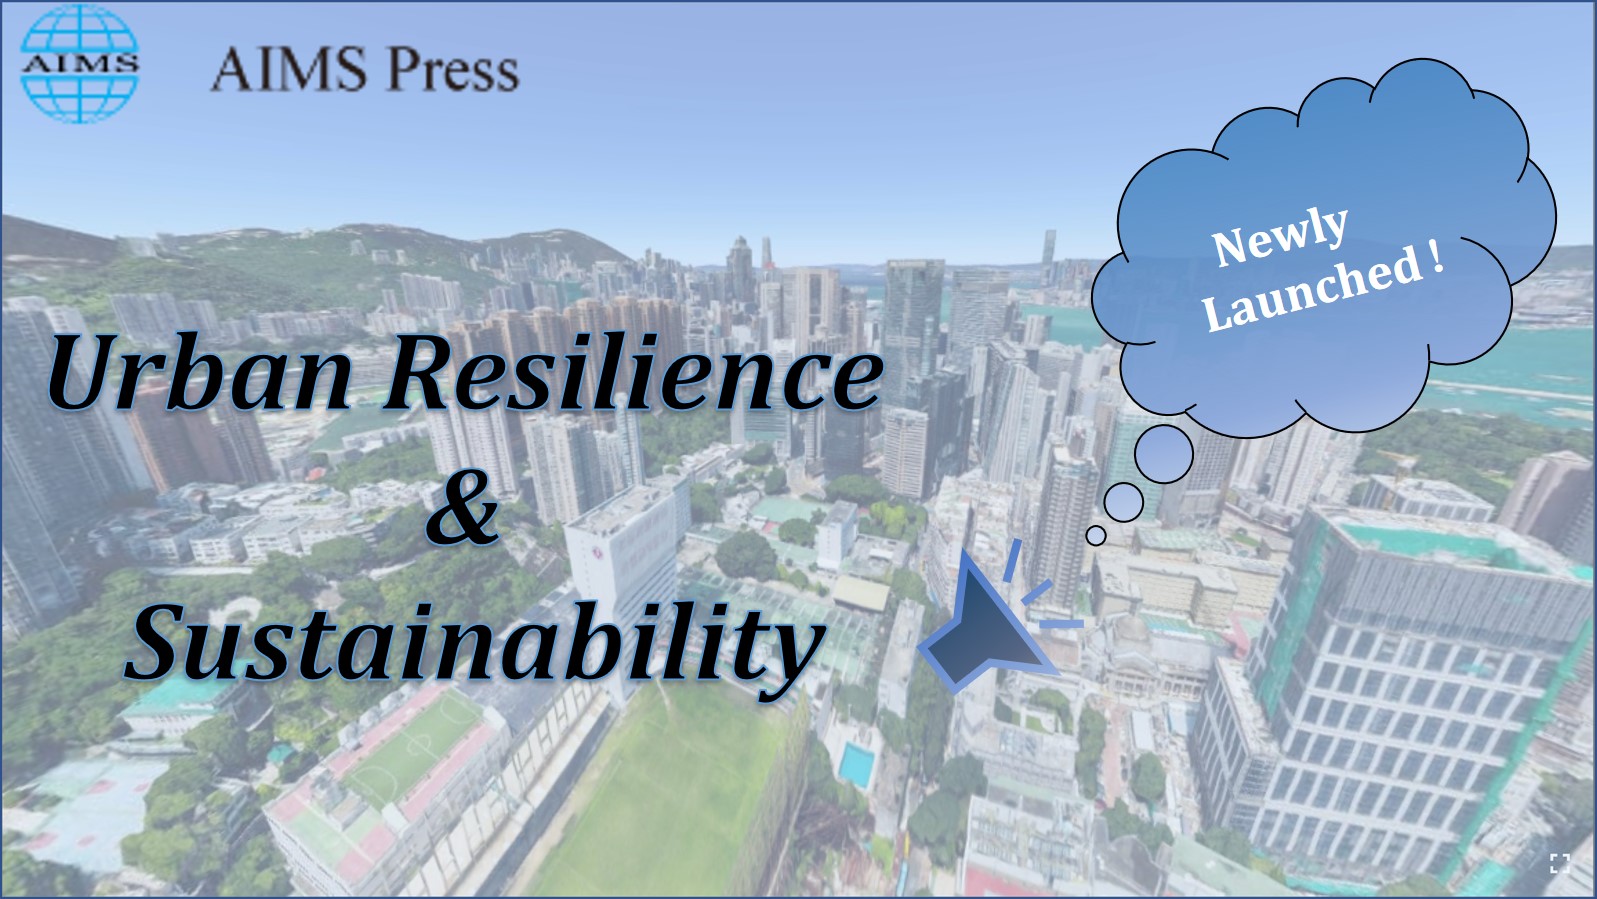 Home - Resilient Cities Network  Building a resilient future for urban  economies